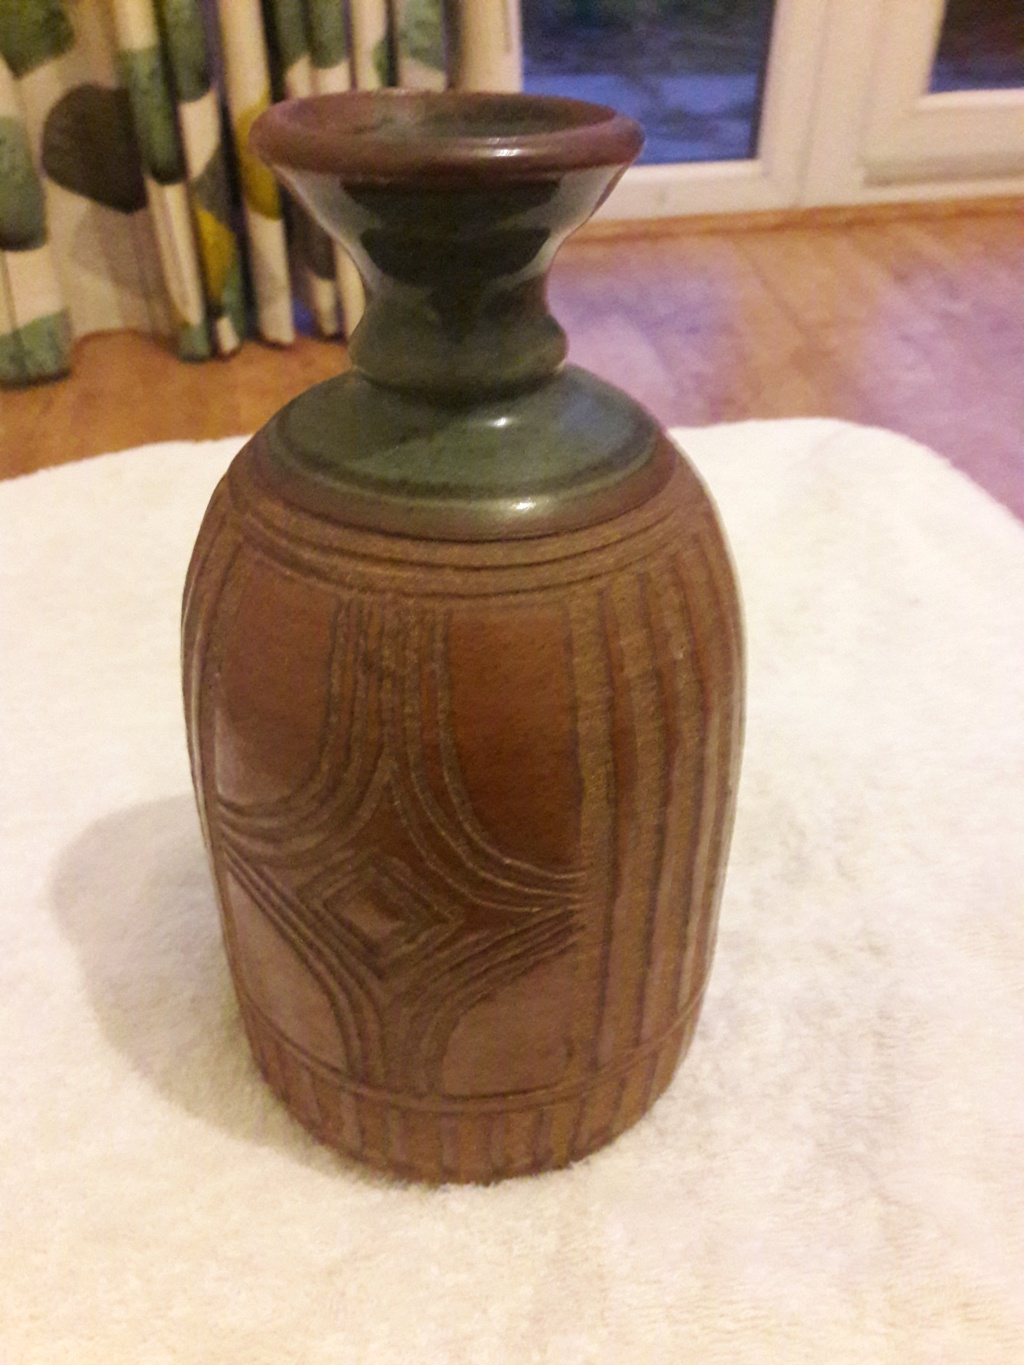 vase With sgraffito design- MSS or SSW mark 20181113